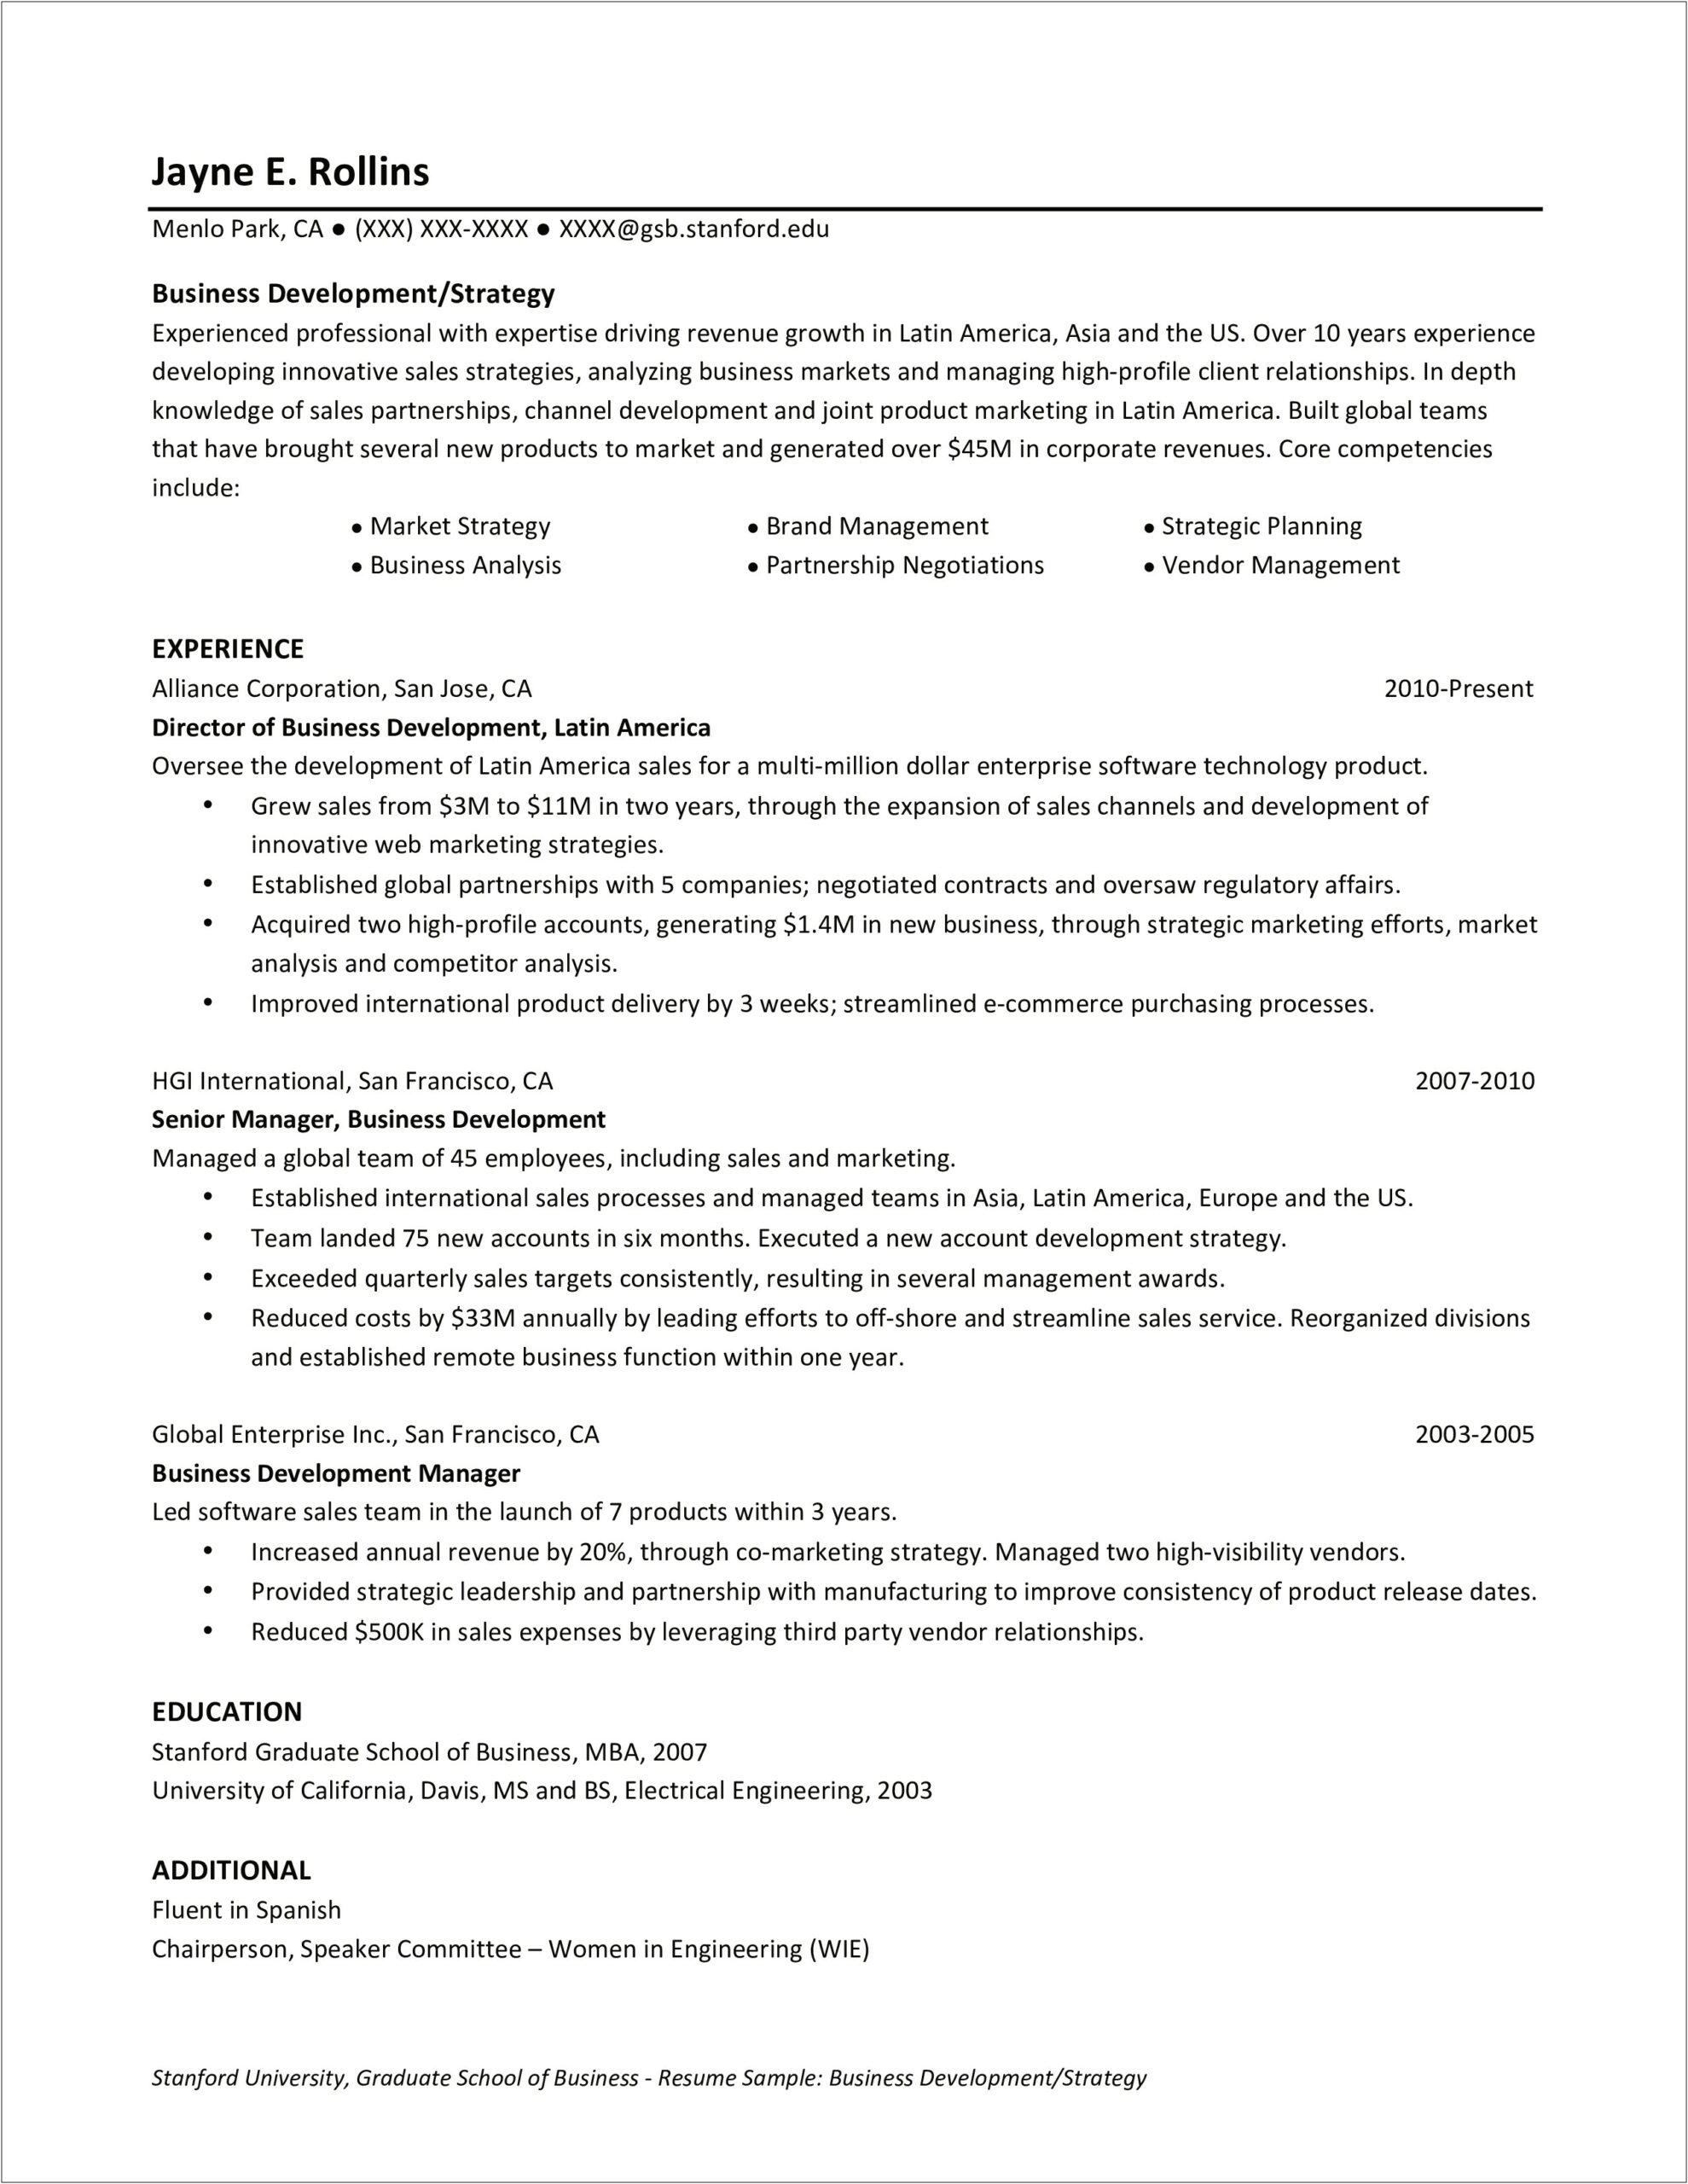 Resume Format For Business Development Manager